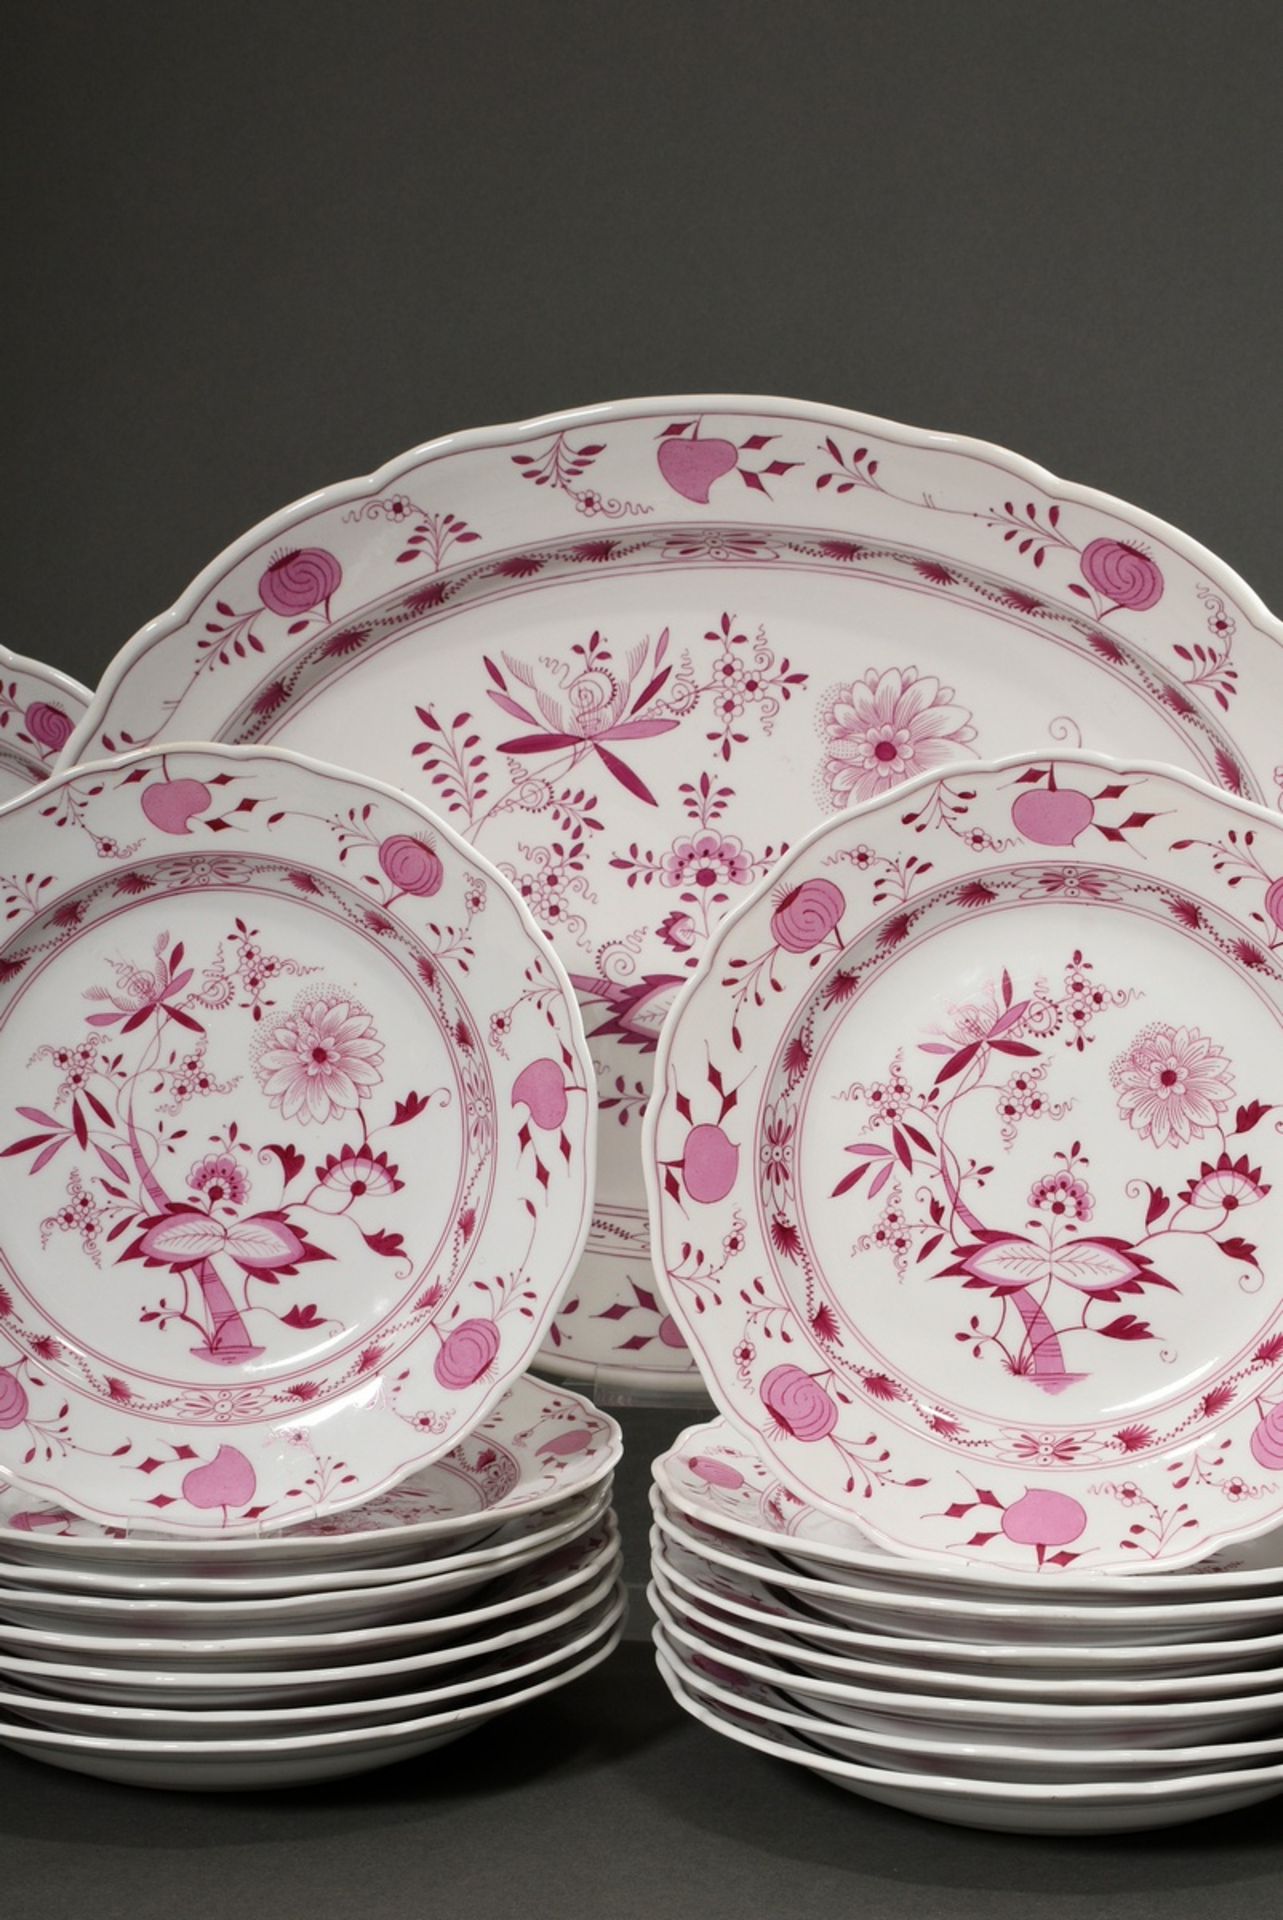 65 Pieces rare Meissen dinner service "Zwiebelmuster Pink", custom made around 1900, consisting of: - Image 17 of 27